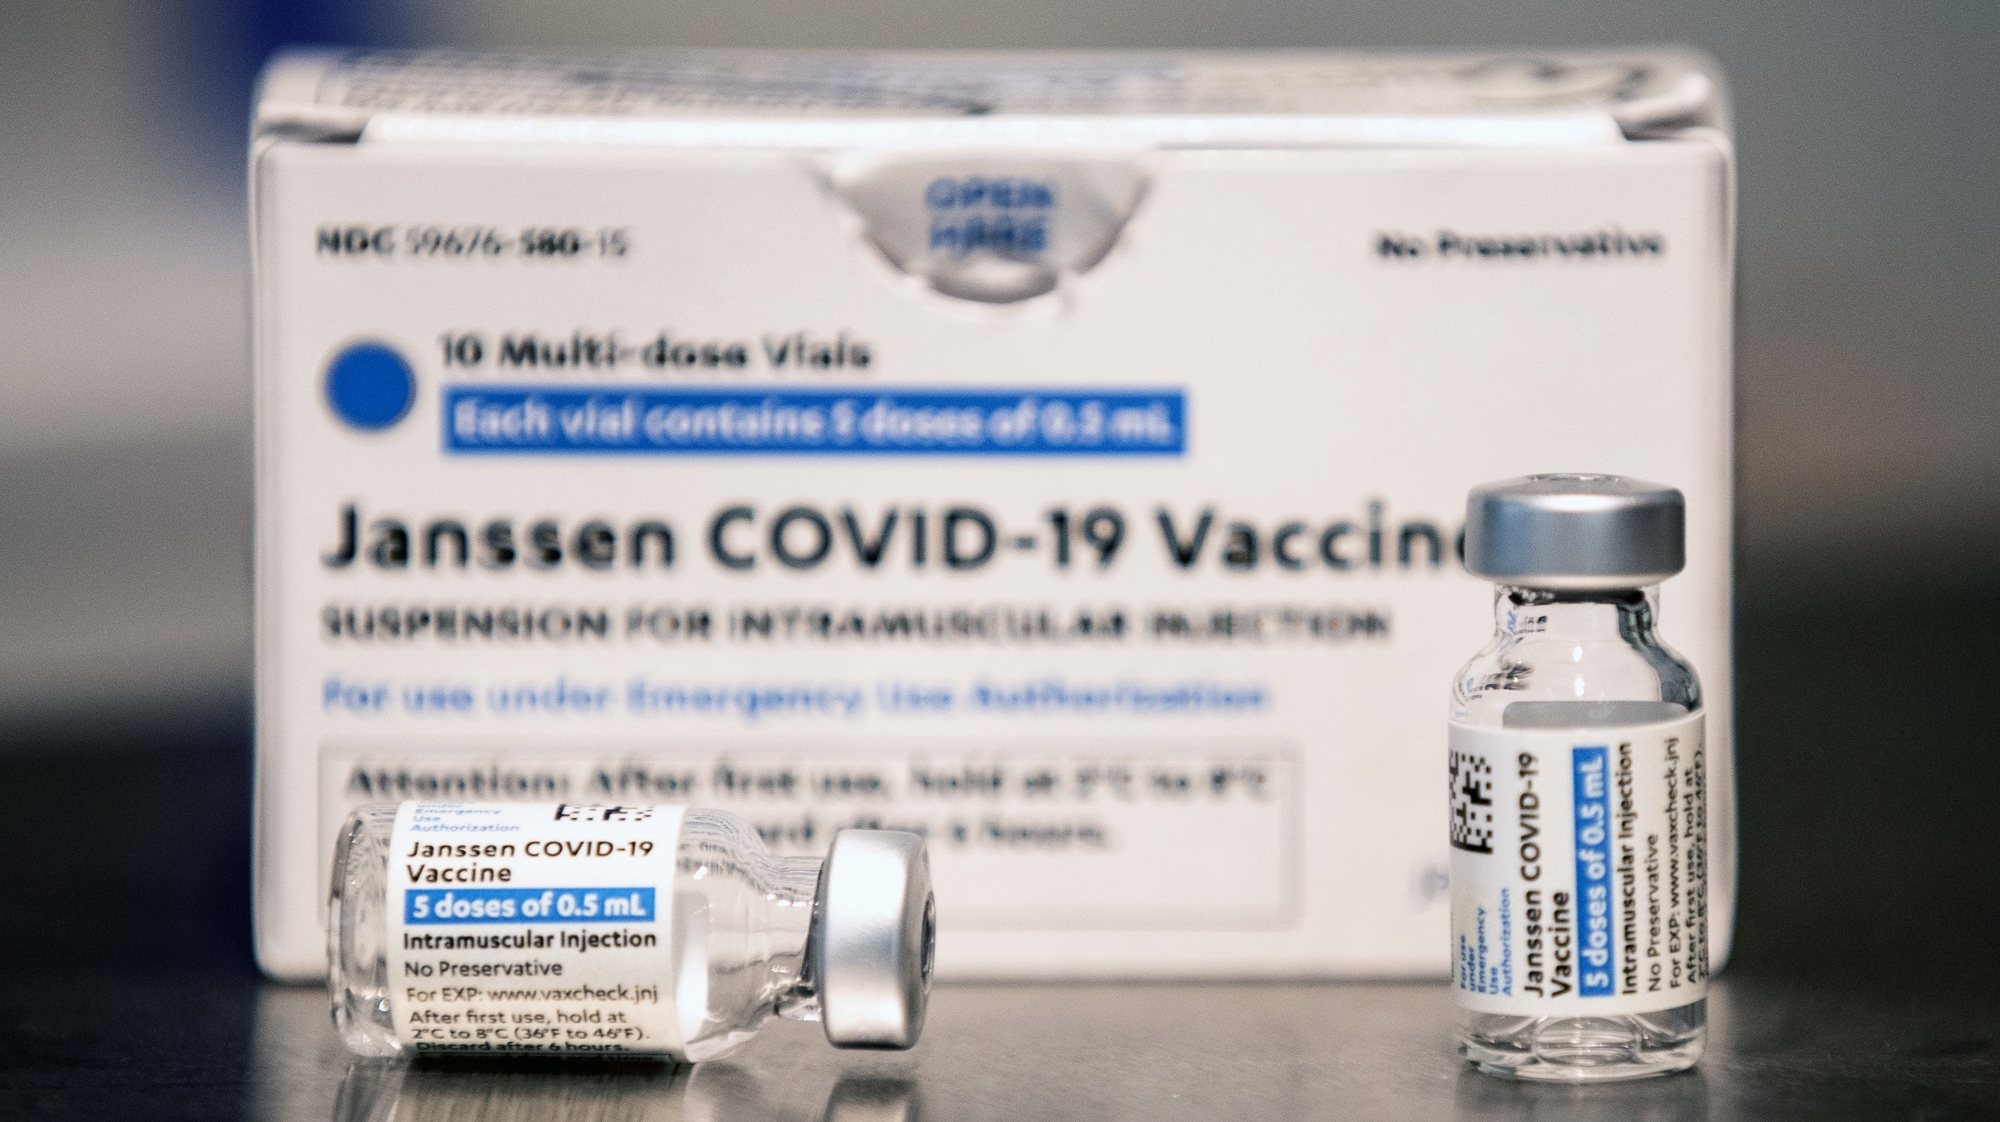 epa09184132 Vials of the Janssen (Pharmaceutical Companies of Johnson &amp; Johnson) vaccine against Covid-19 are displayed during a vaccination operation organized by the Los Angeles Football Club at the Bank of California Stadium in Los Angeles, California, USA, 07 May 2021. Los Angeles Football Club has announced that vaccinated fans will receive a 20% discount on merchandise at the LAFC team store.  EPA/ETIENNE LAURENT